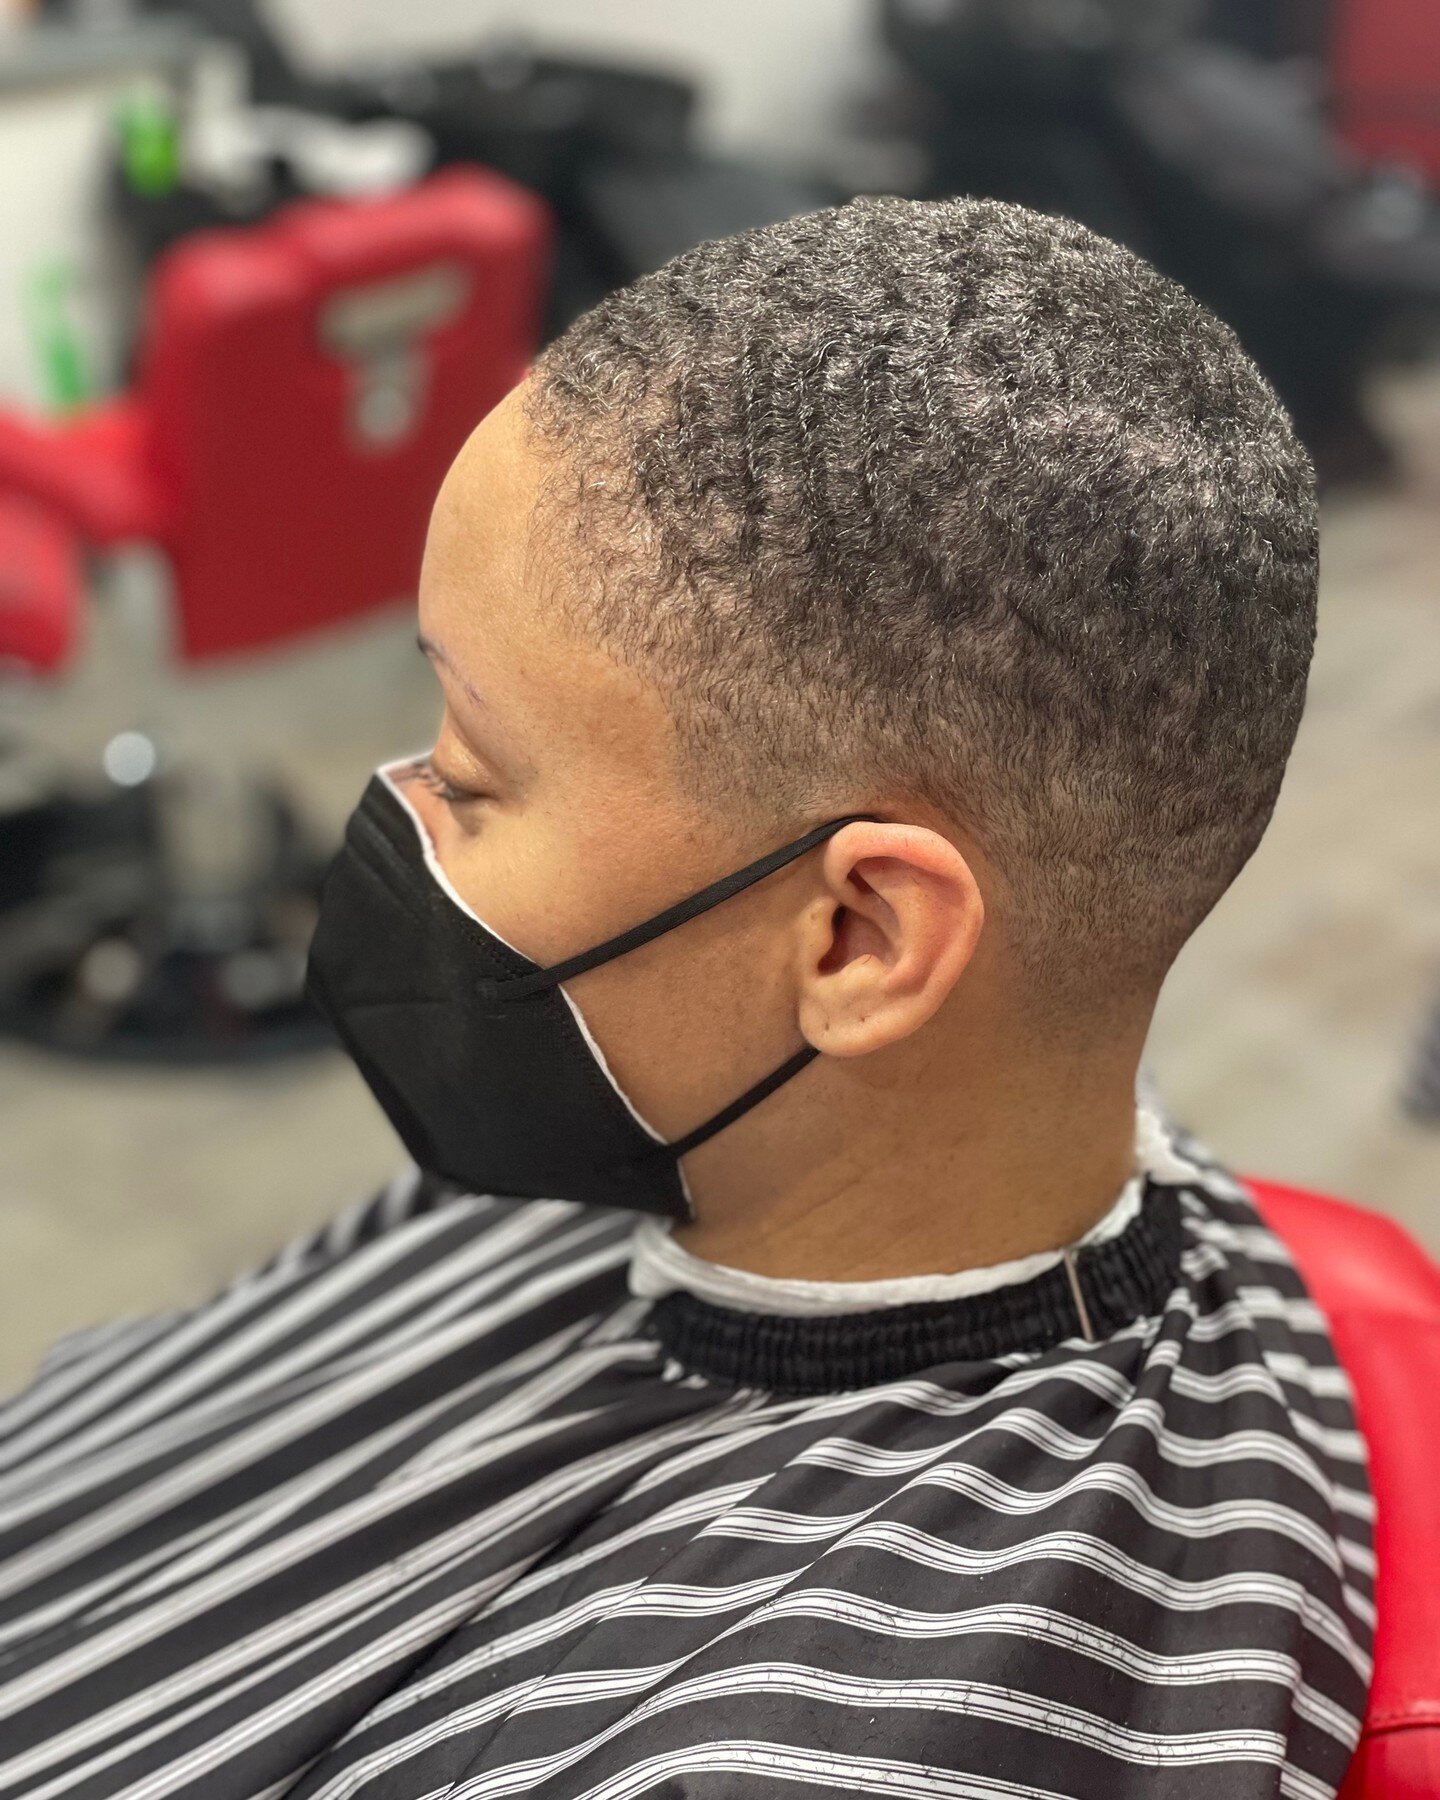 We&rsquo;ll have you swimming into the new year. 😅🌊
____________________________________________

#ladyclipper #shesmybarber #barbershopconnect #ladybarber #barbershop #barberconnect #skilledbarber #thebarberpost #barbering #dmvbarber  #barbergang 